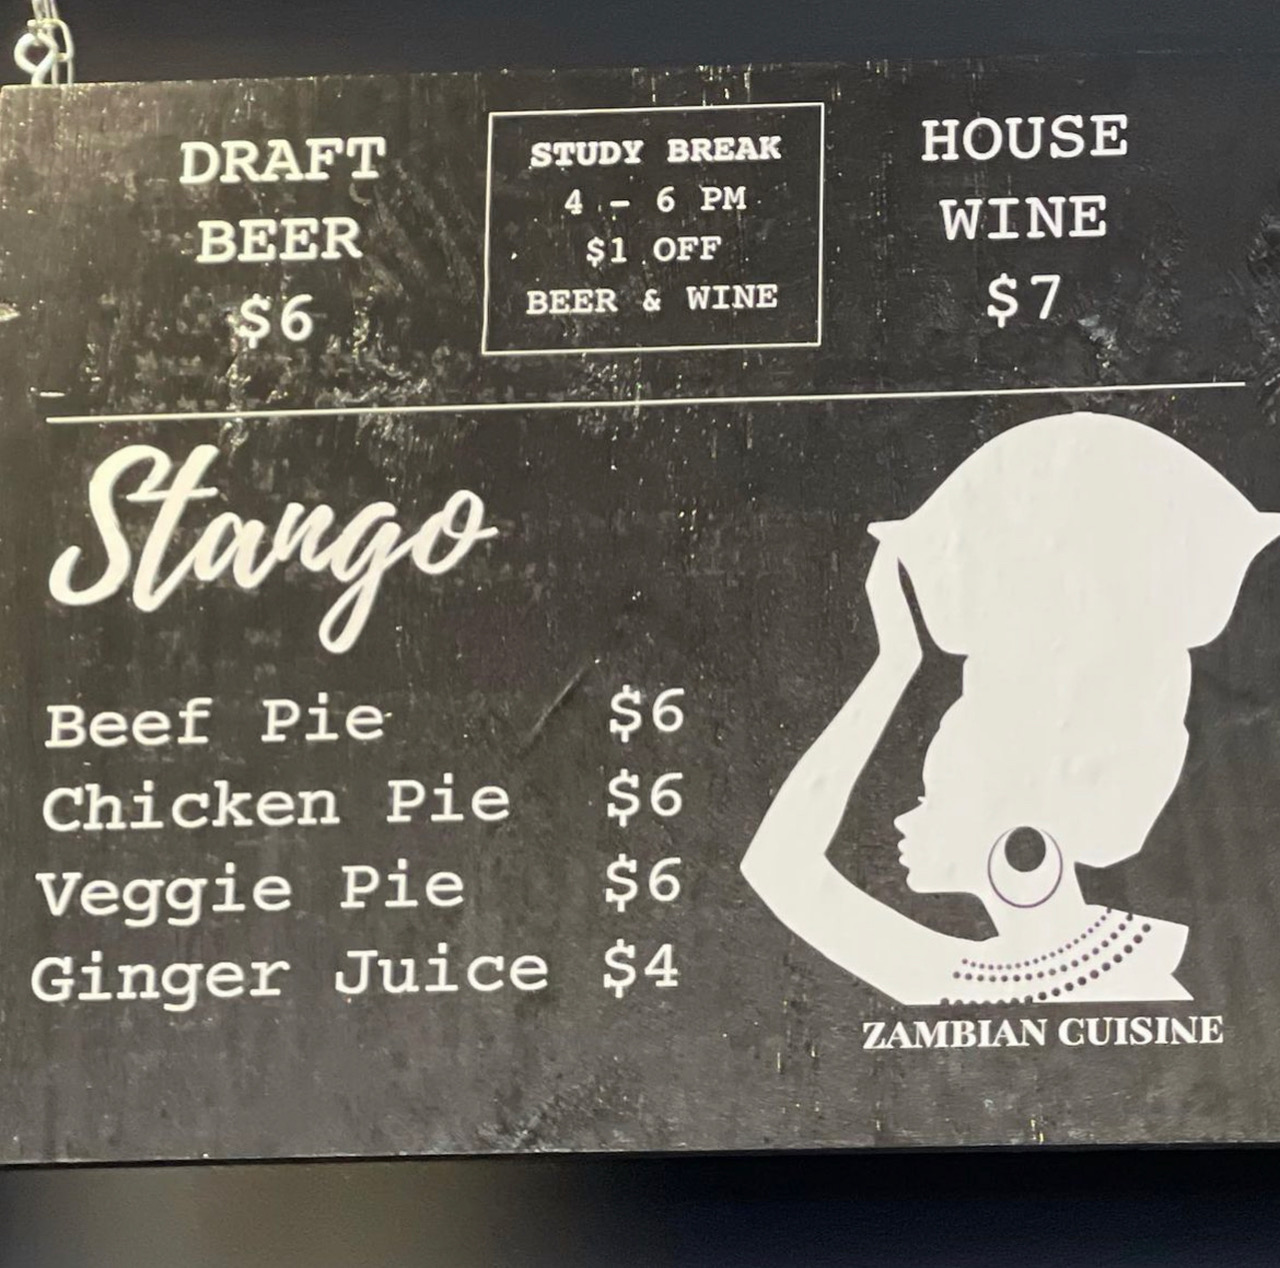 A photo of the new menu at Cafeteria & Company which includes beef pies and ginger juice from Stango Cuisine. Photo by weloveurbana on Instagram.